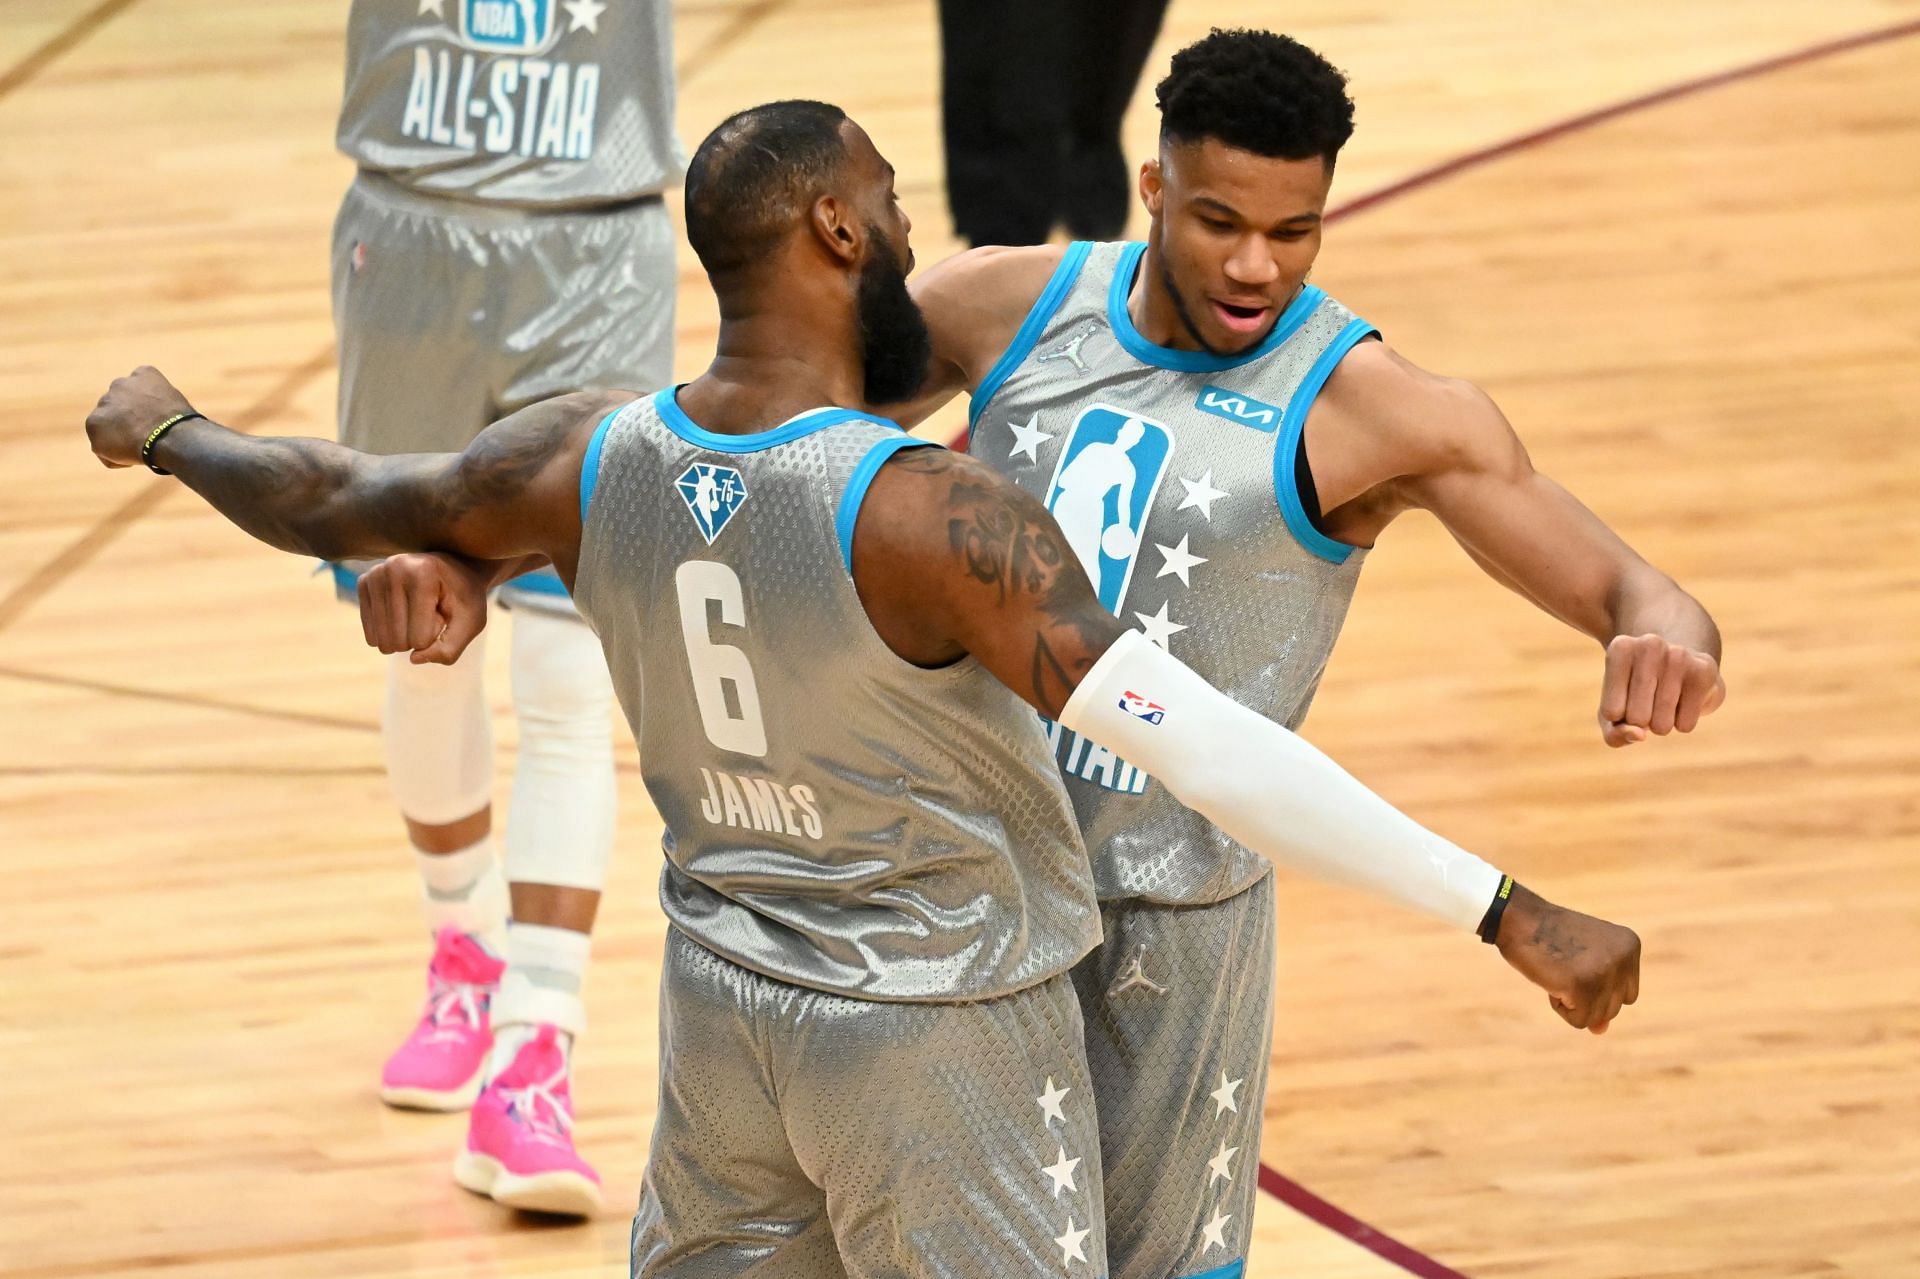 LeBron James #6 and Giannis Antetokounmpo #34 of Team LeBron celebrate after defeating Team Durant 163-160 in during the 2022 NBA All-Star Game